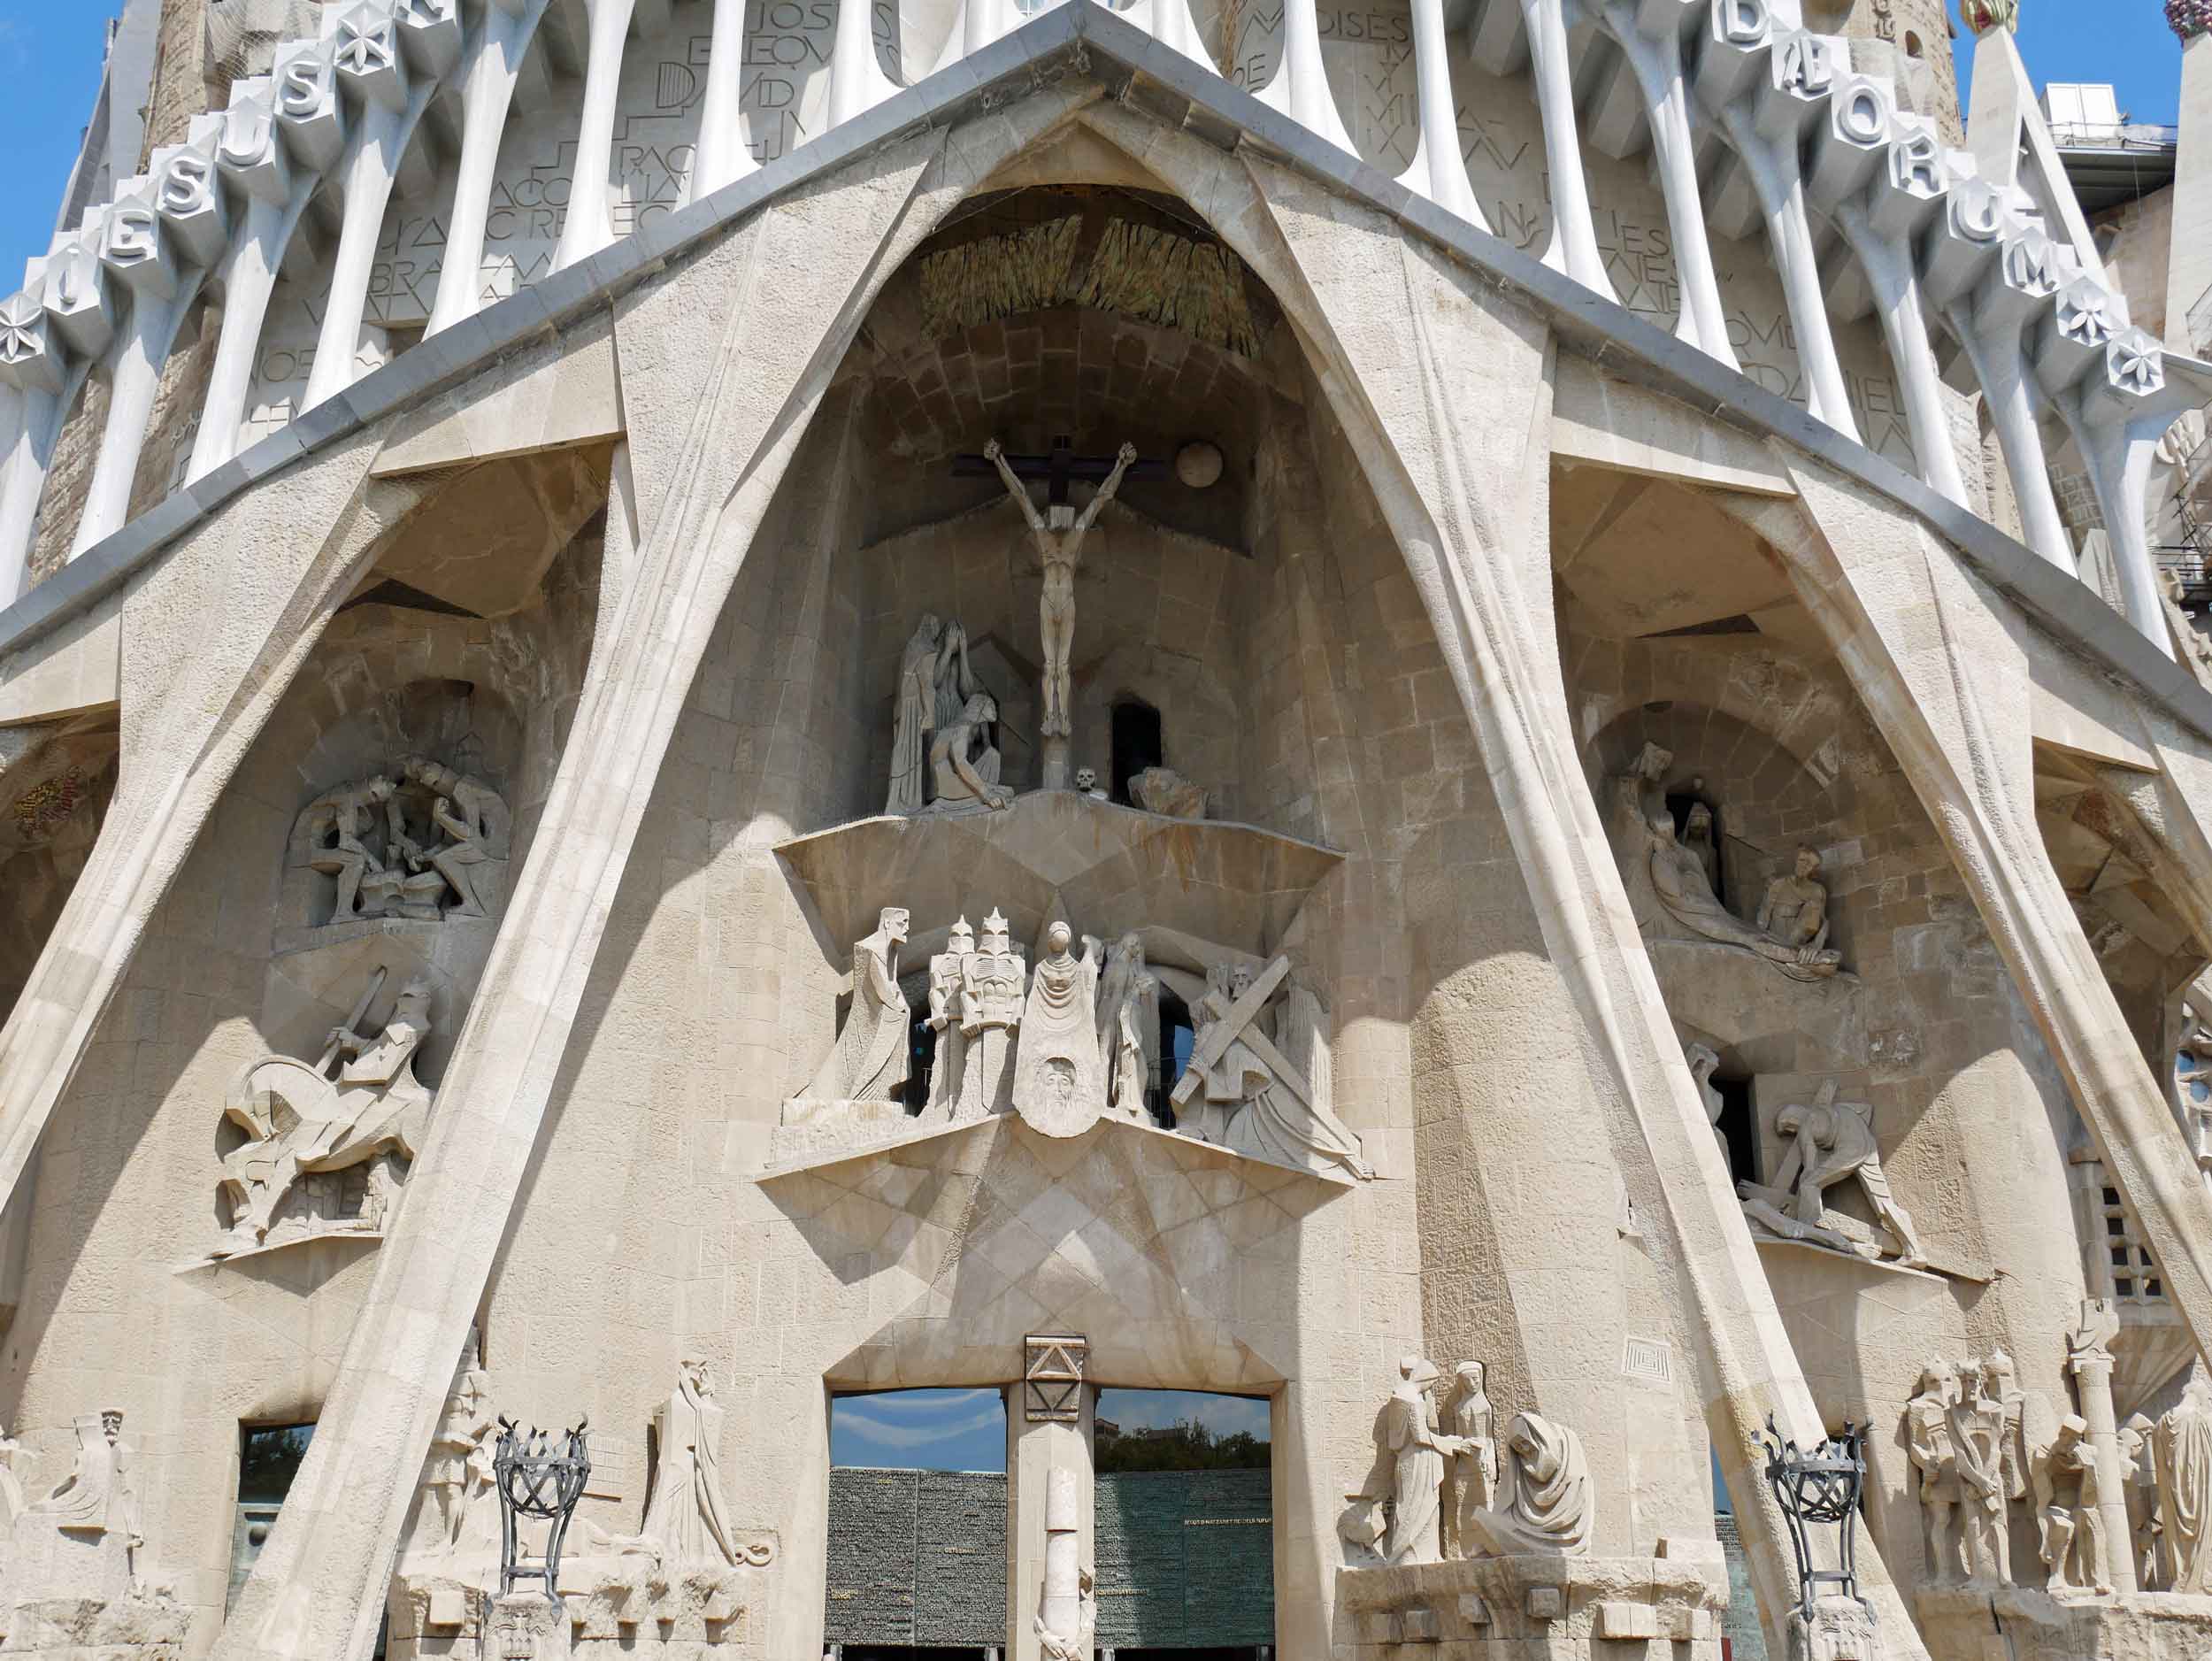  The landmark Sagrada Família cathedral consists namely of Gothic and Art Nouveau architectural styles. 